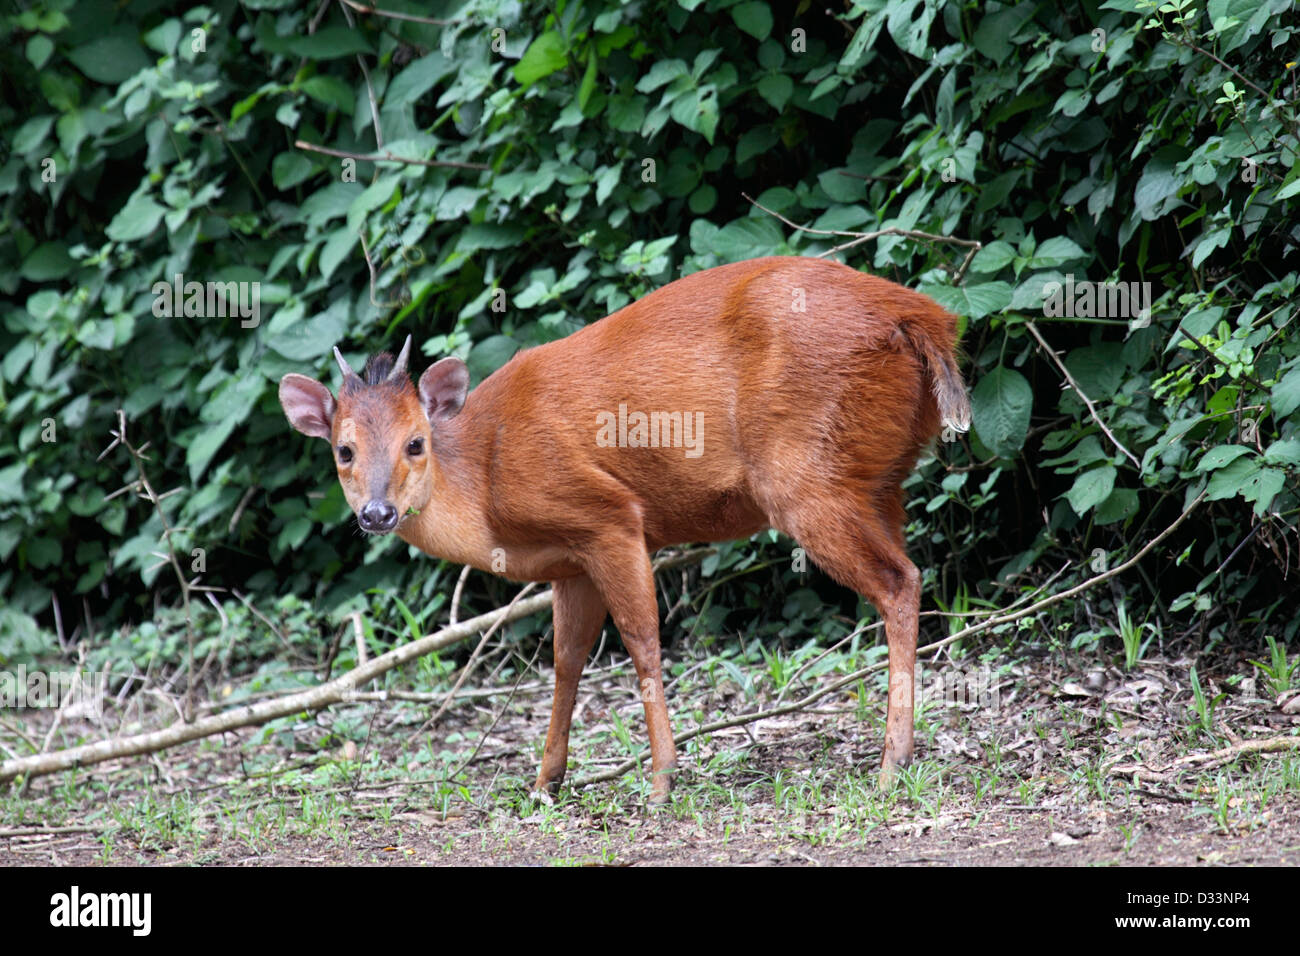 Red duiker in South Africa Stock Photo